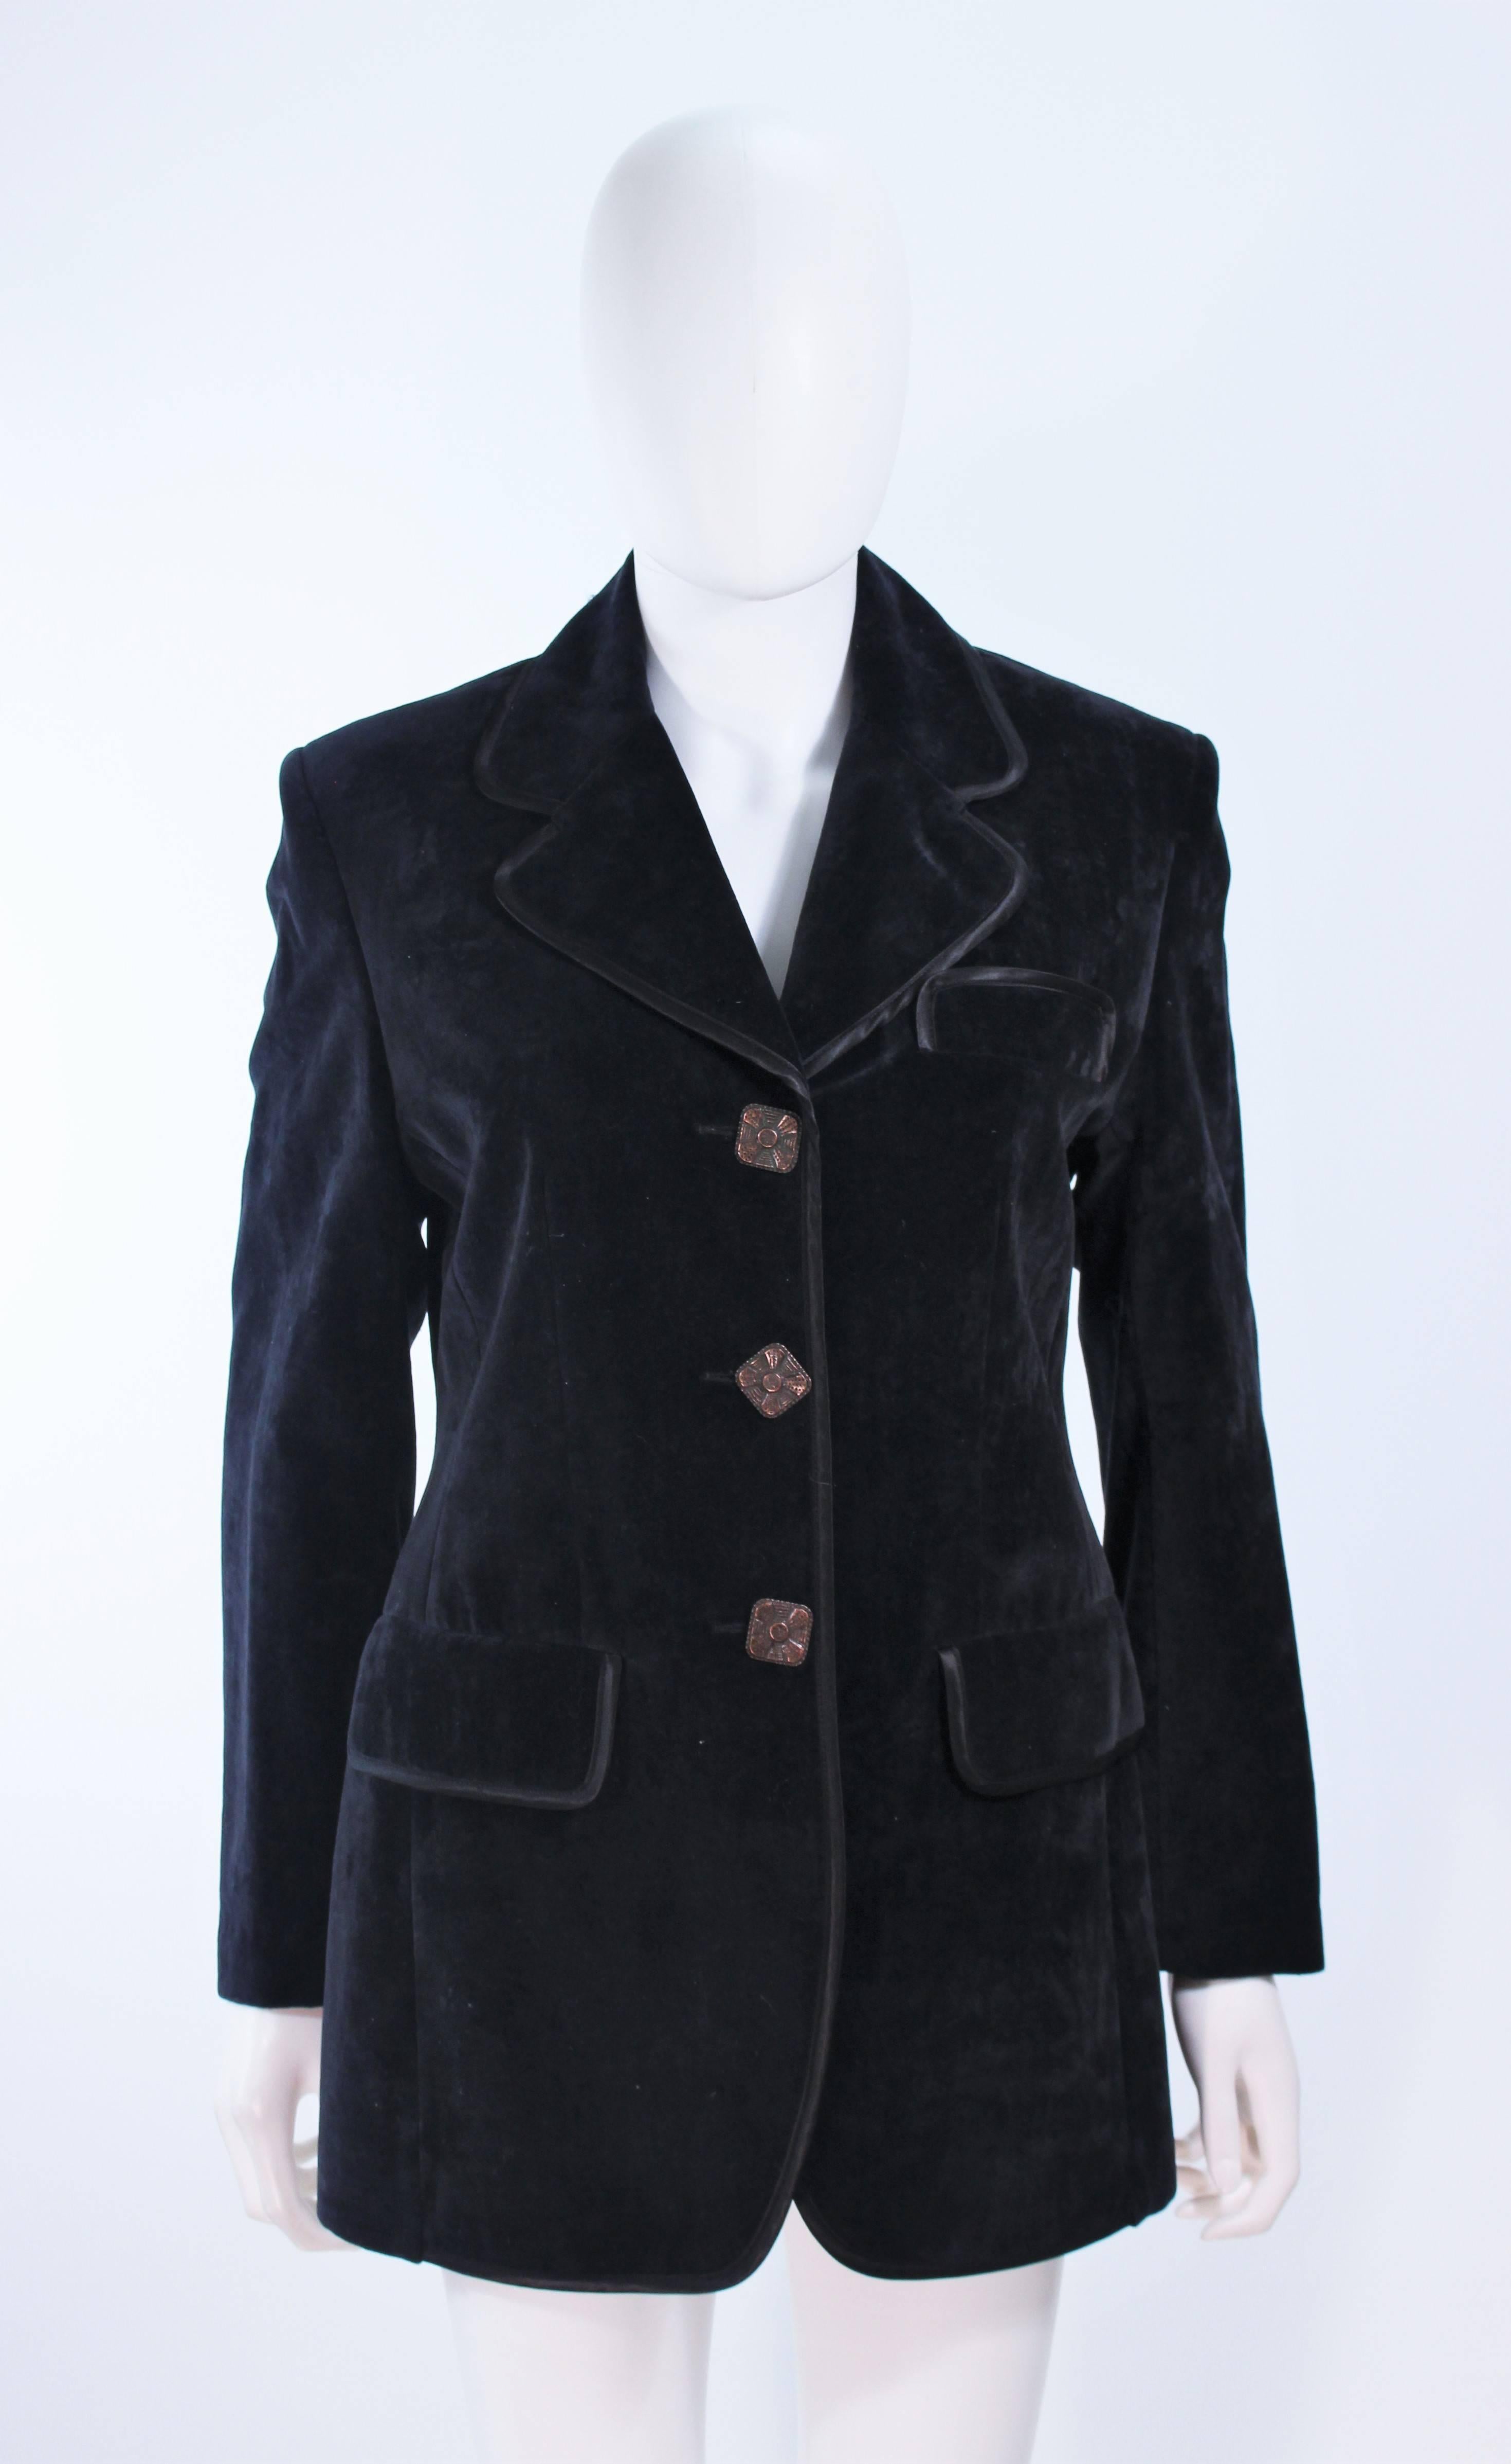 This Christian LaCroix is composed of a black velvet with a silk trim. Features center front buttons and pocket details. In excellent vintage condition.

**Please cross-reference measurements for personal accuracy. Size in description box is an